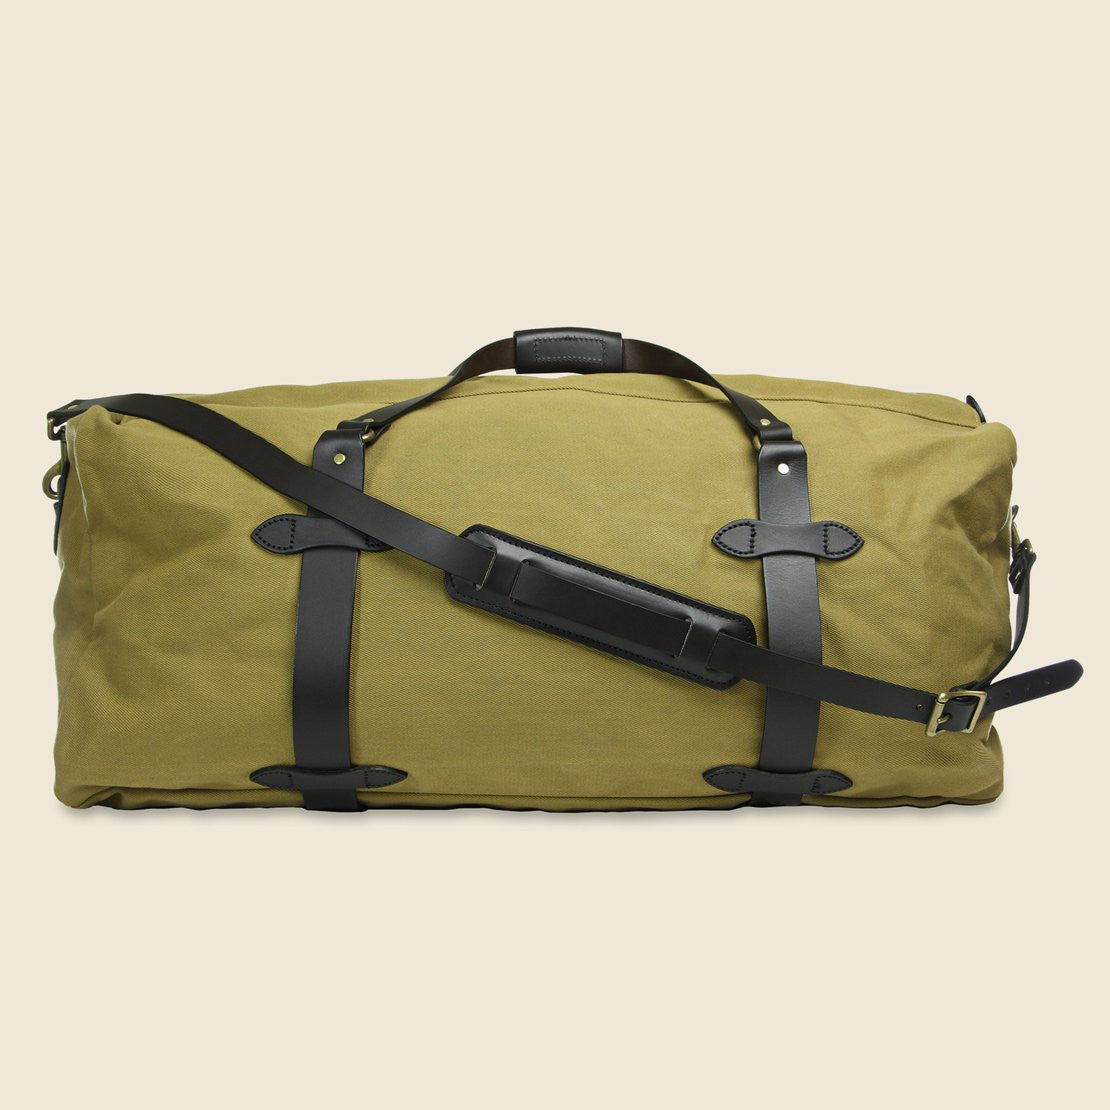 Large Duffle Bag - Tan - Filson - STAG Provisions - Accessories - Bags / Luggage